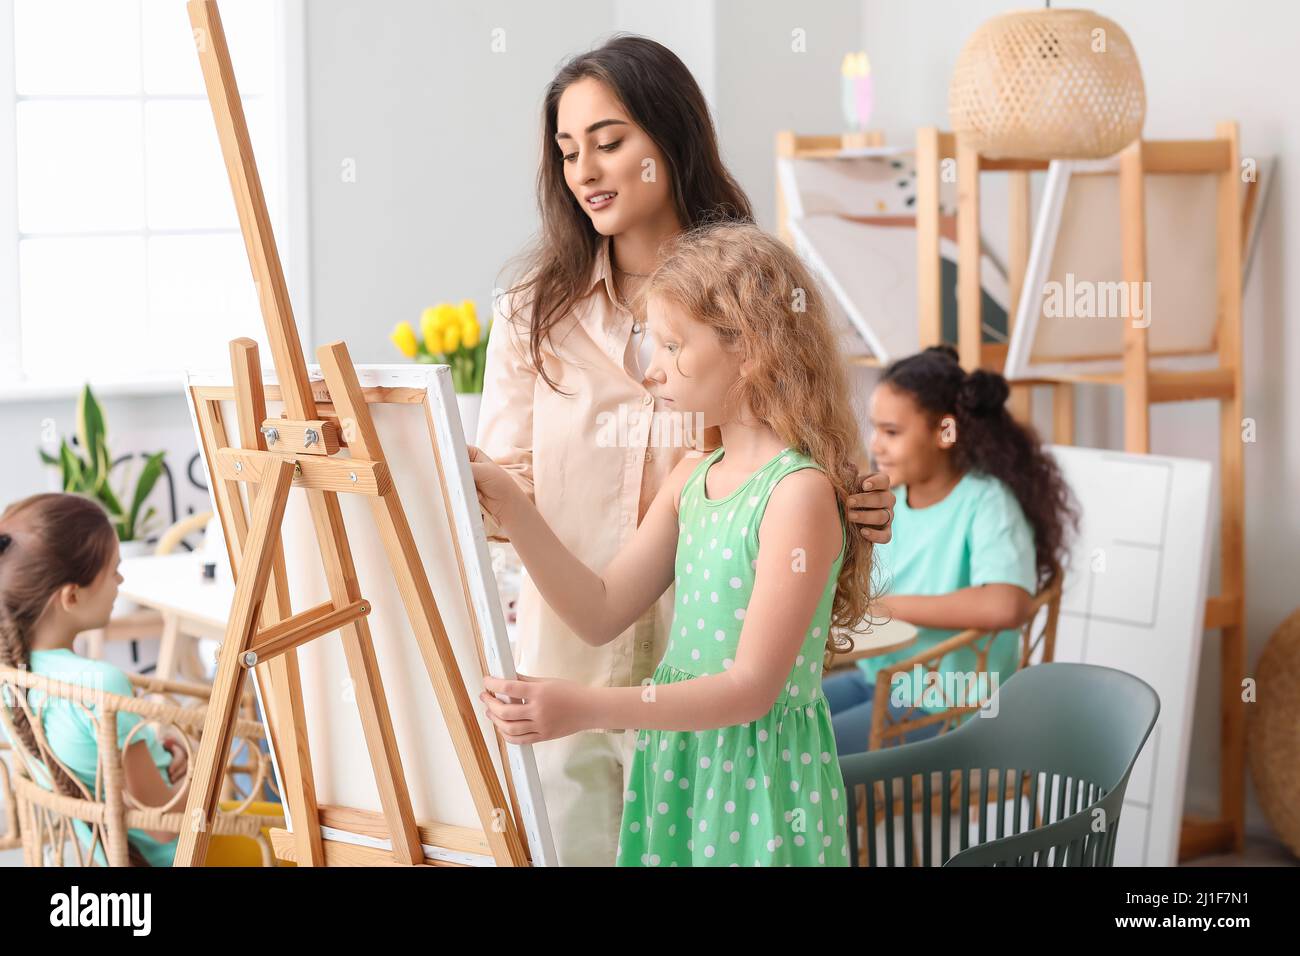 Cute girl and teacher during master-class in art Stock Photo